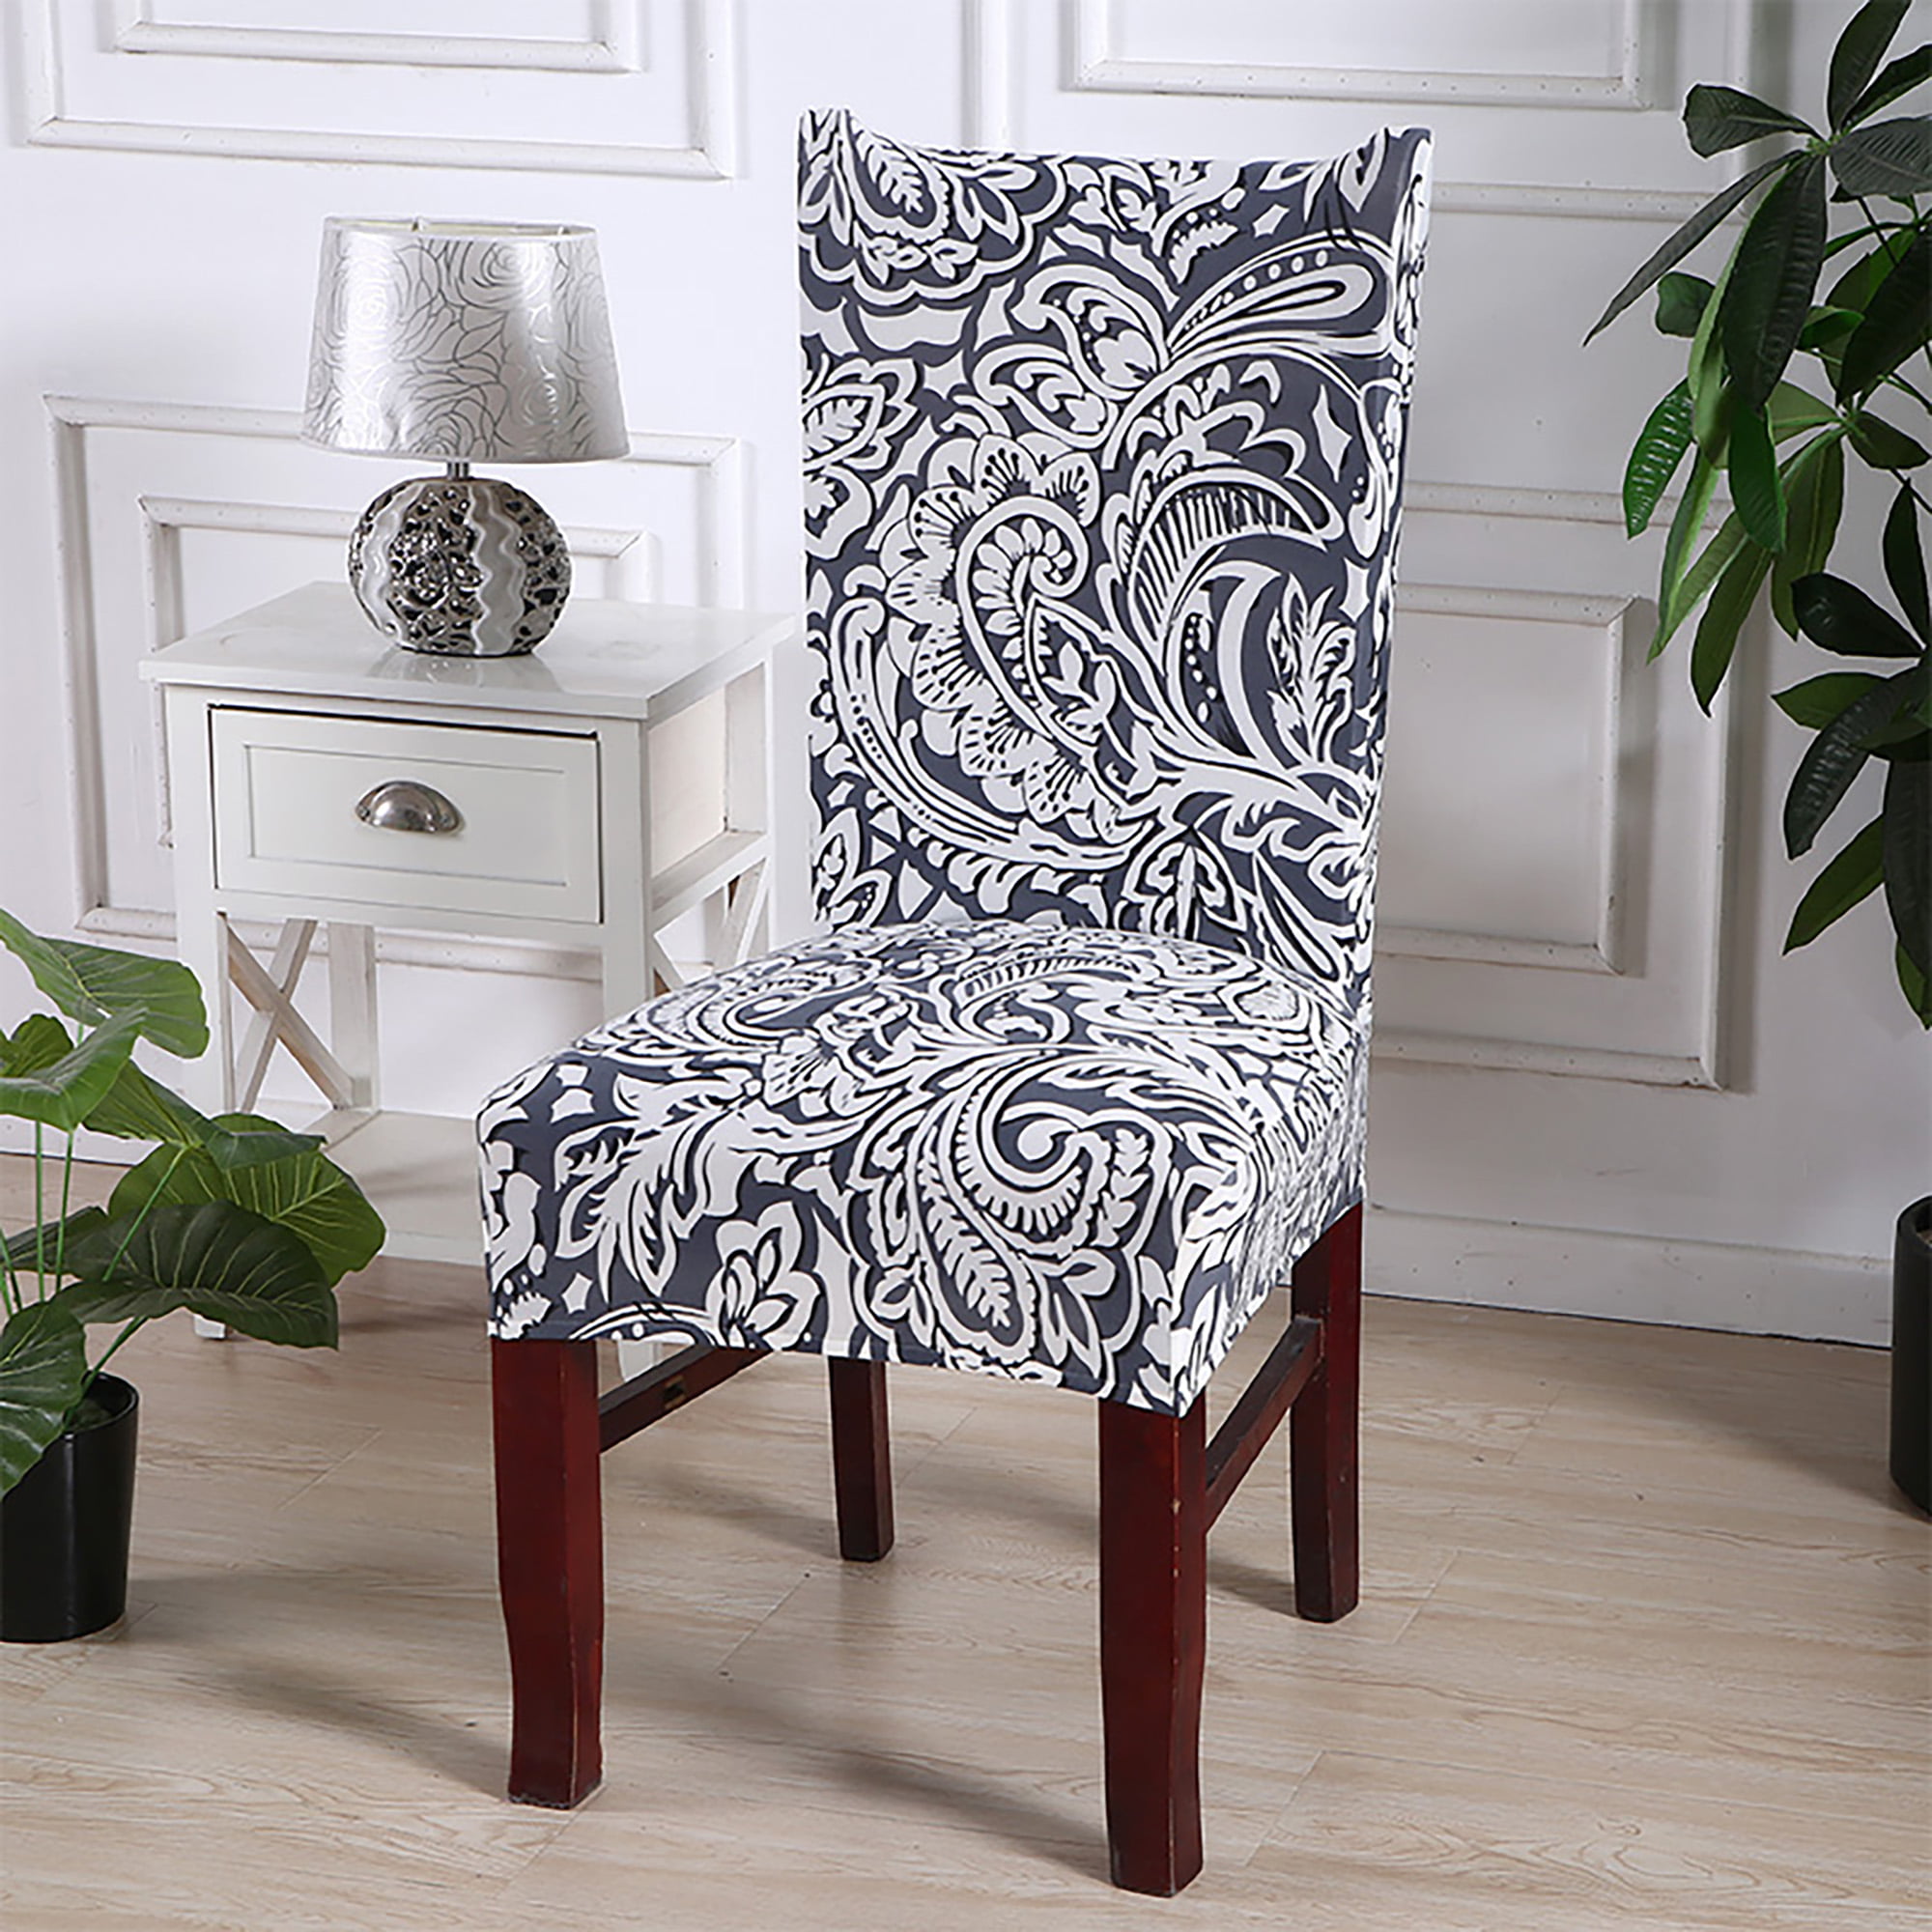 Details about   1/4/6pcs Stretch Spandex Dining Room Printed Chair Covers Slipcovers Home Decor 